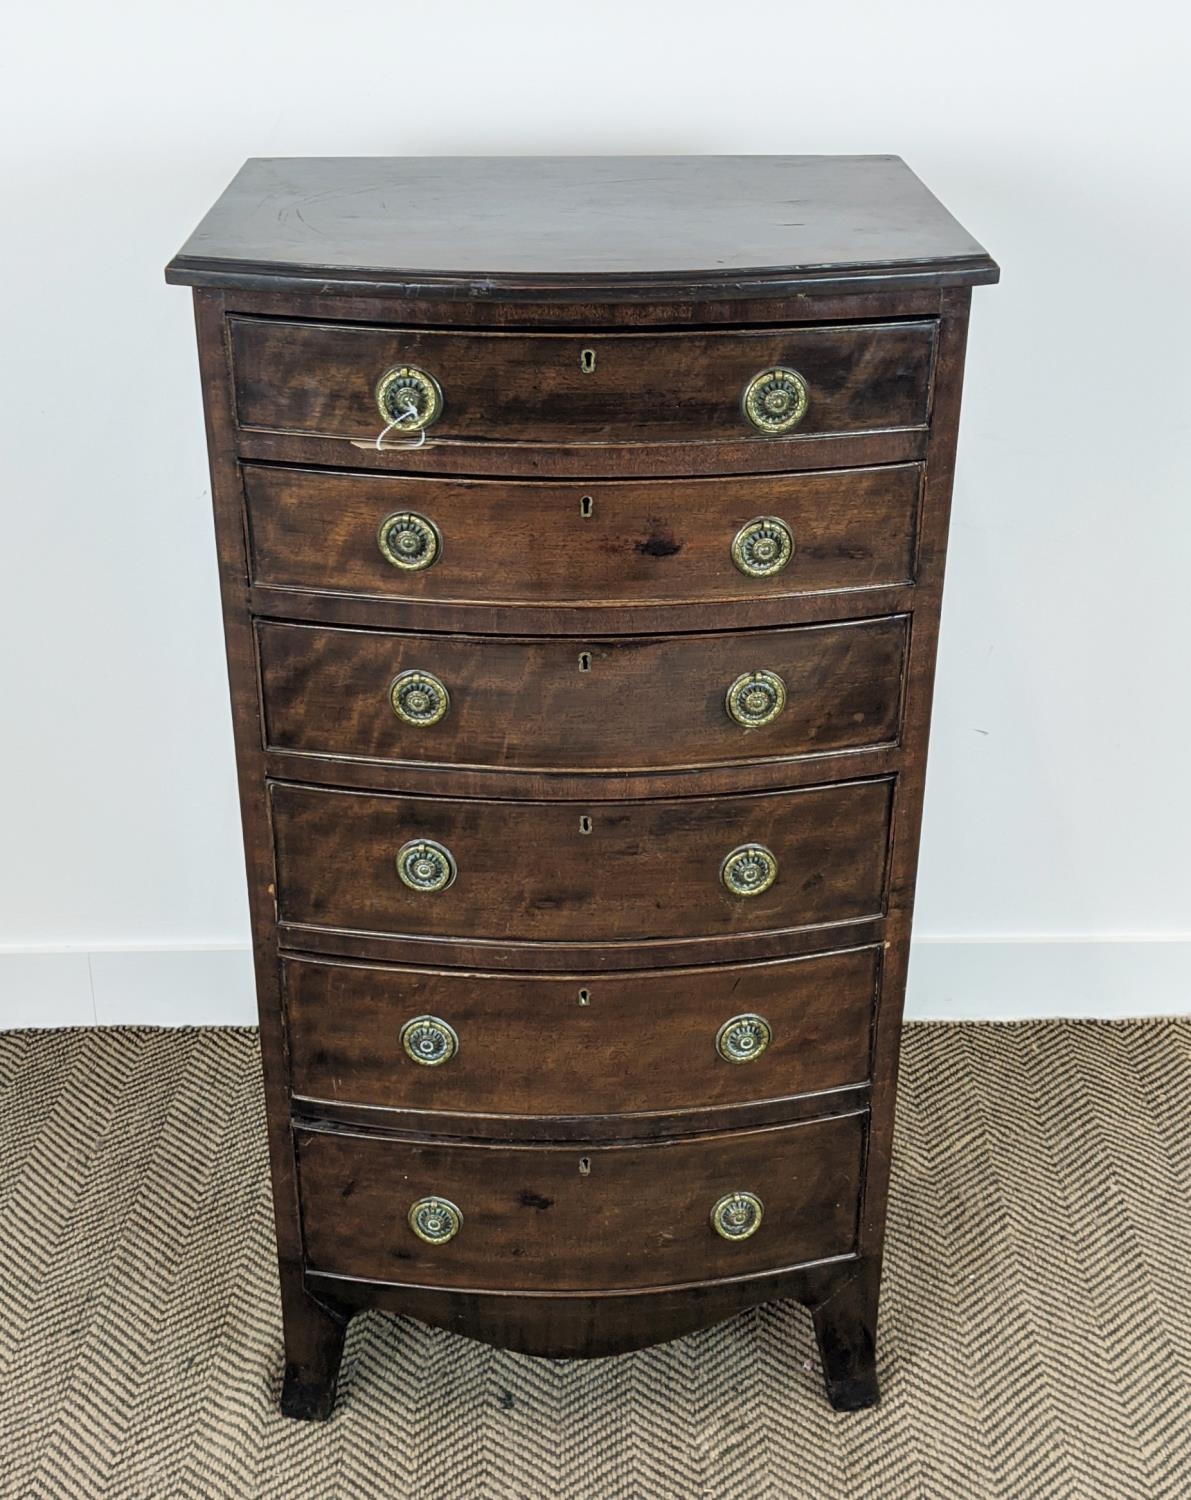 BOWFRONT NARROW CHEST, early 20th century Georgian revival mahogany with six drawers, 115cm H x 61cm - Image 2 of 10